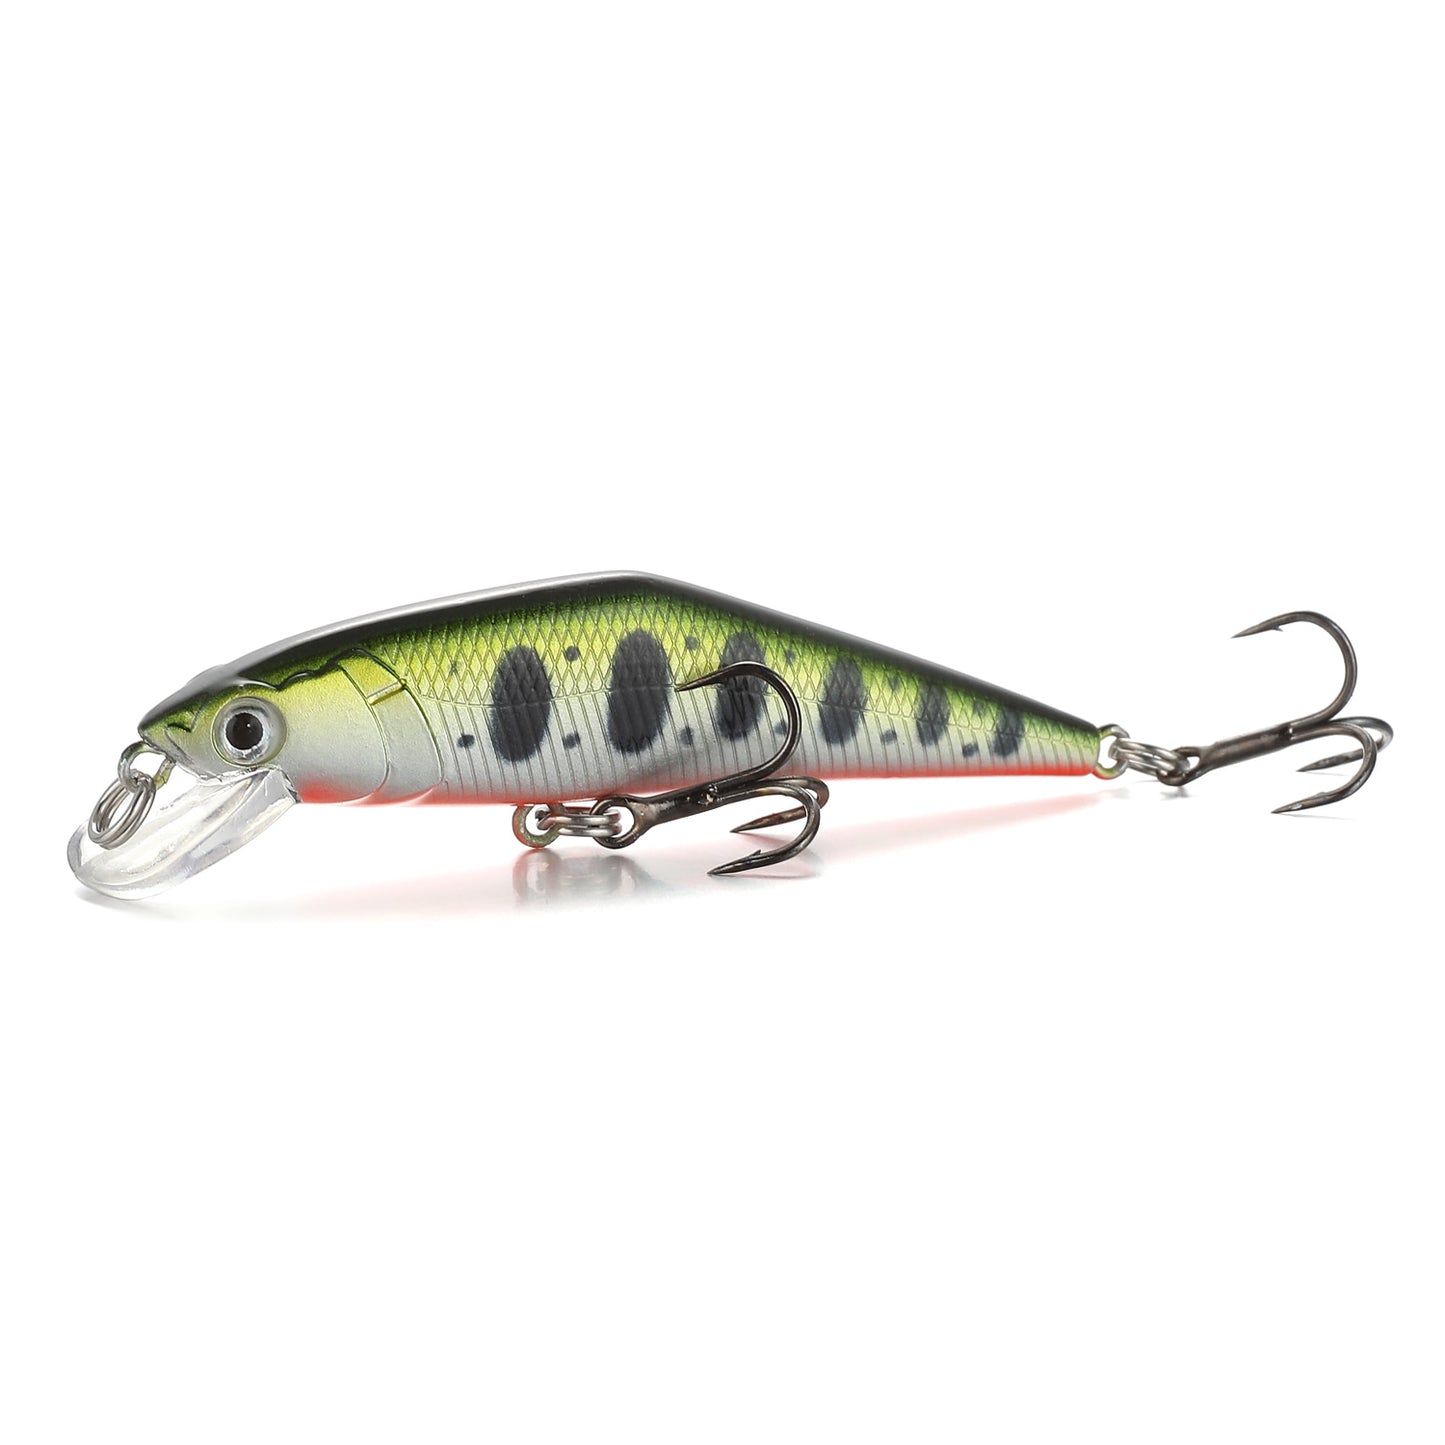 LTHTUG Japan Pesca Stream Fishing Lure 63mm 8g Sinking Minnow Peche Artificial Hard CrankBait For Bass Perch Pike Salmon Trout Lure